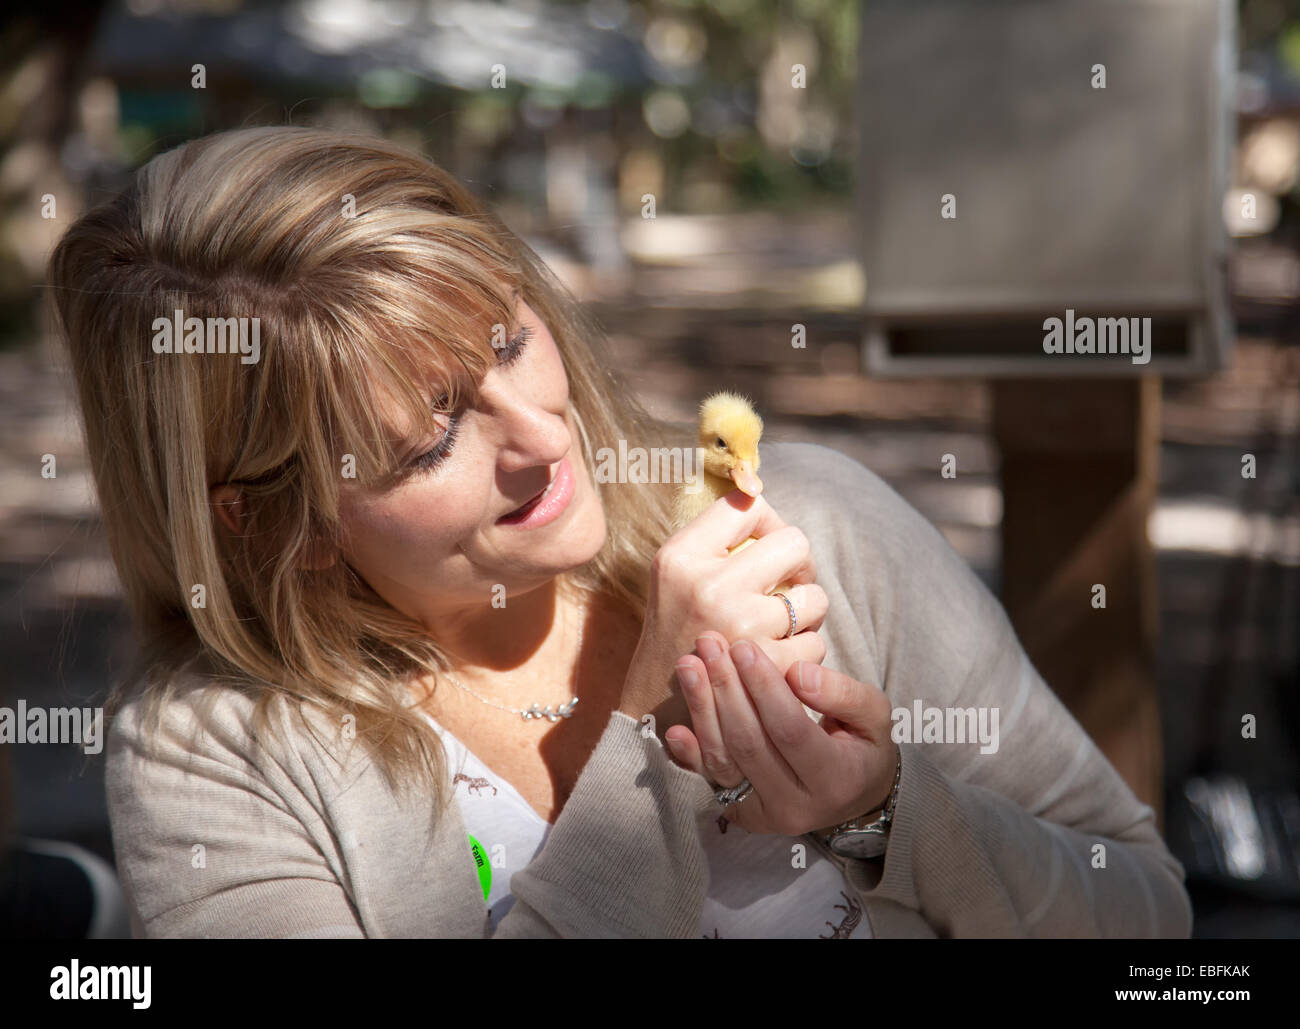 Woman holding baby duck Banque D'Images